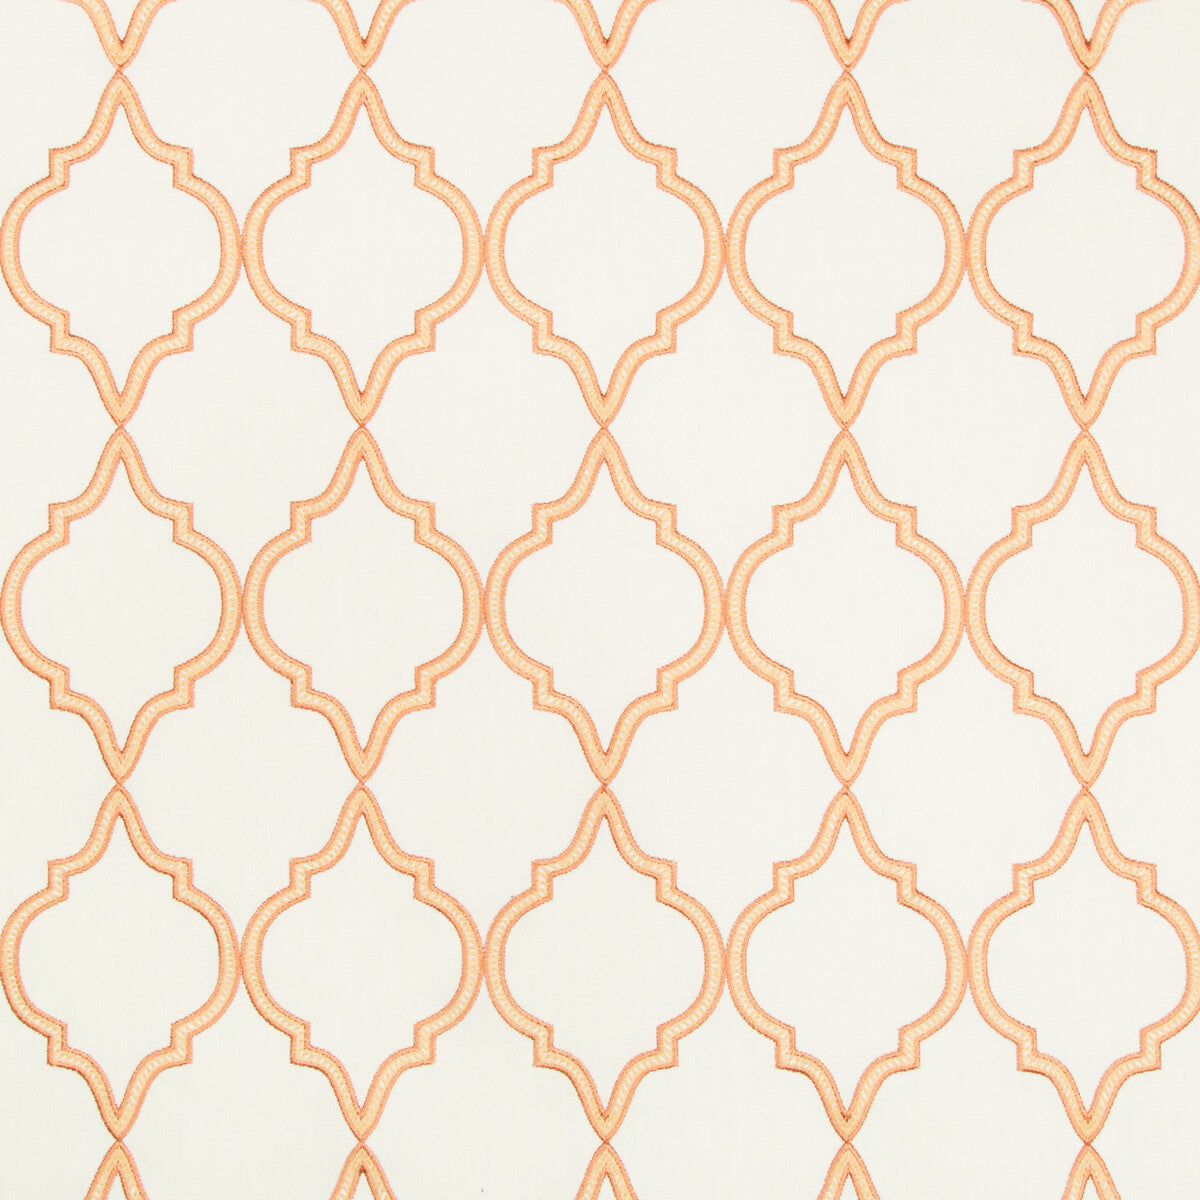 Highhope fabric in terracotta color - pattern 35301.12.0 - by Kravet Basics in the Greenwich collection